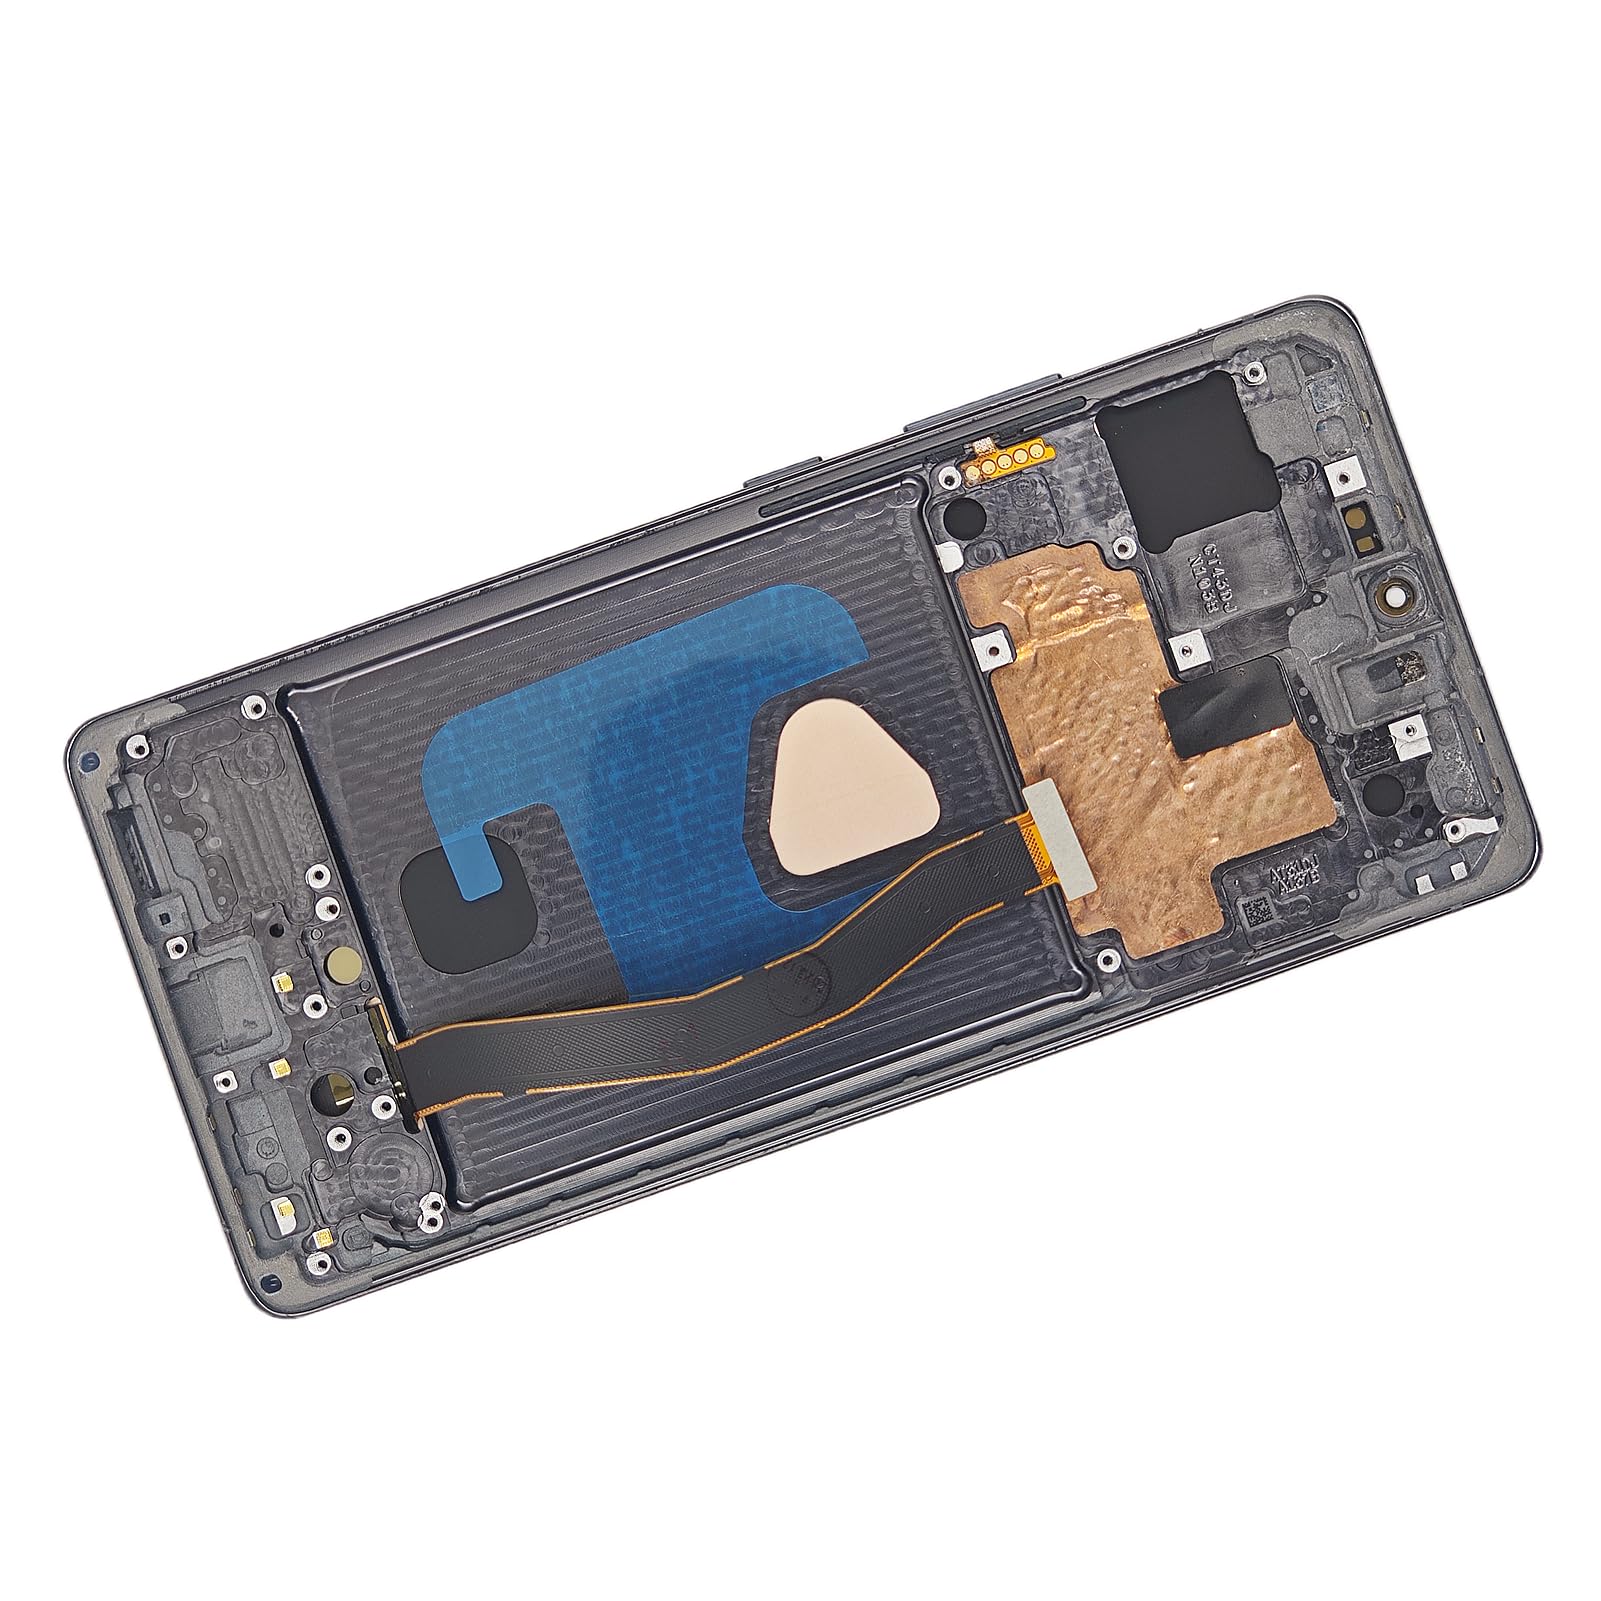 AMOLED Display Assembly With Frame for Samsung Galaxy S10 Lite